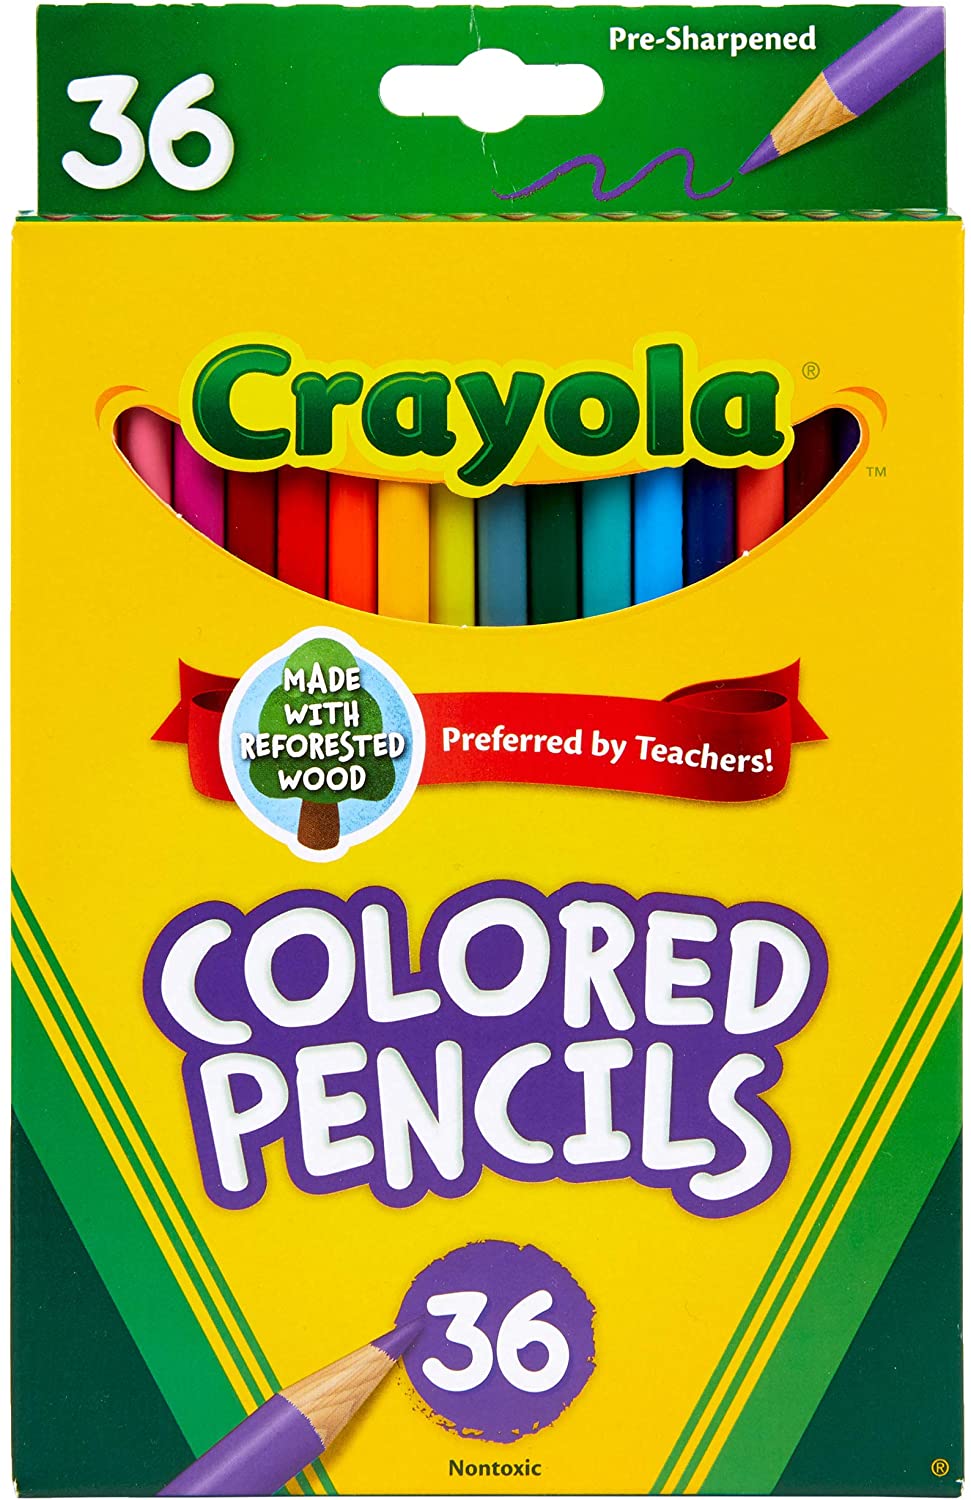 Crayola Colored Pencils For Adults (50 Count), Colored Pencil Set, Pair  With Adult Coloring Books, Art Pencils, Coloring Set [ Exclusive]